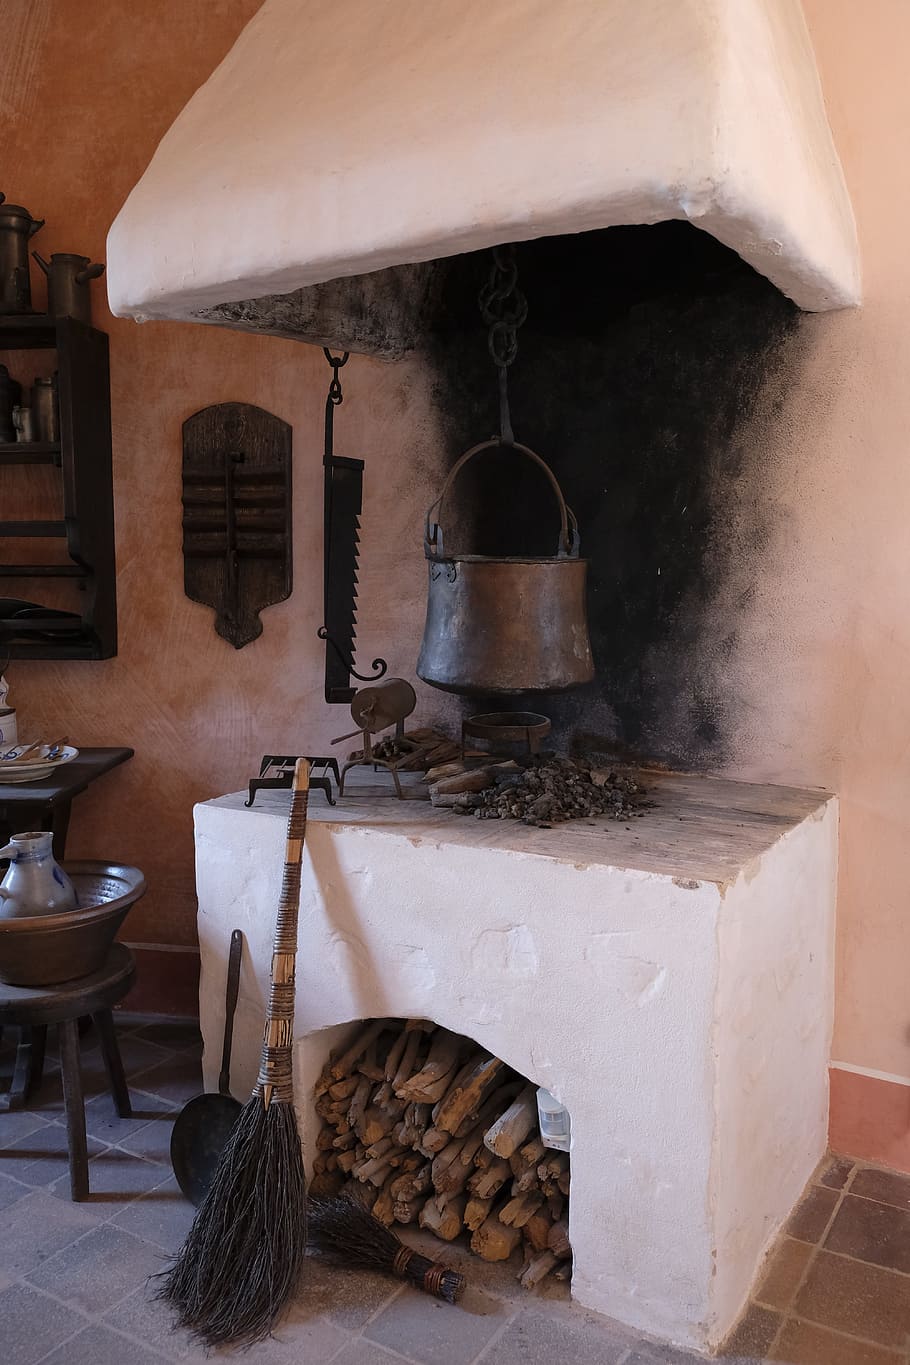 cook, cooking zone, fireplace, oven, boiler, pot, old, antique, historically, water boiler